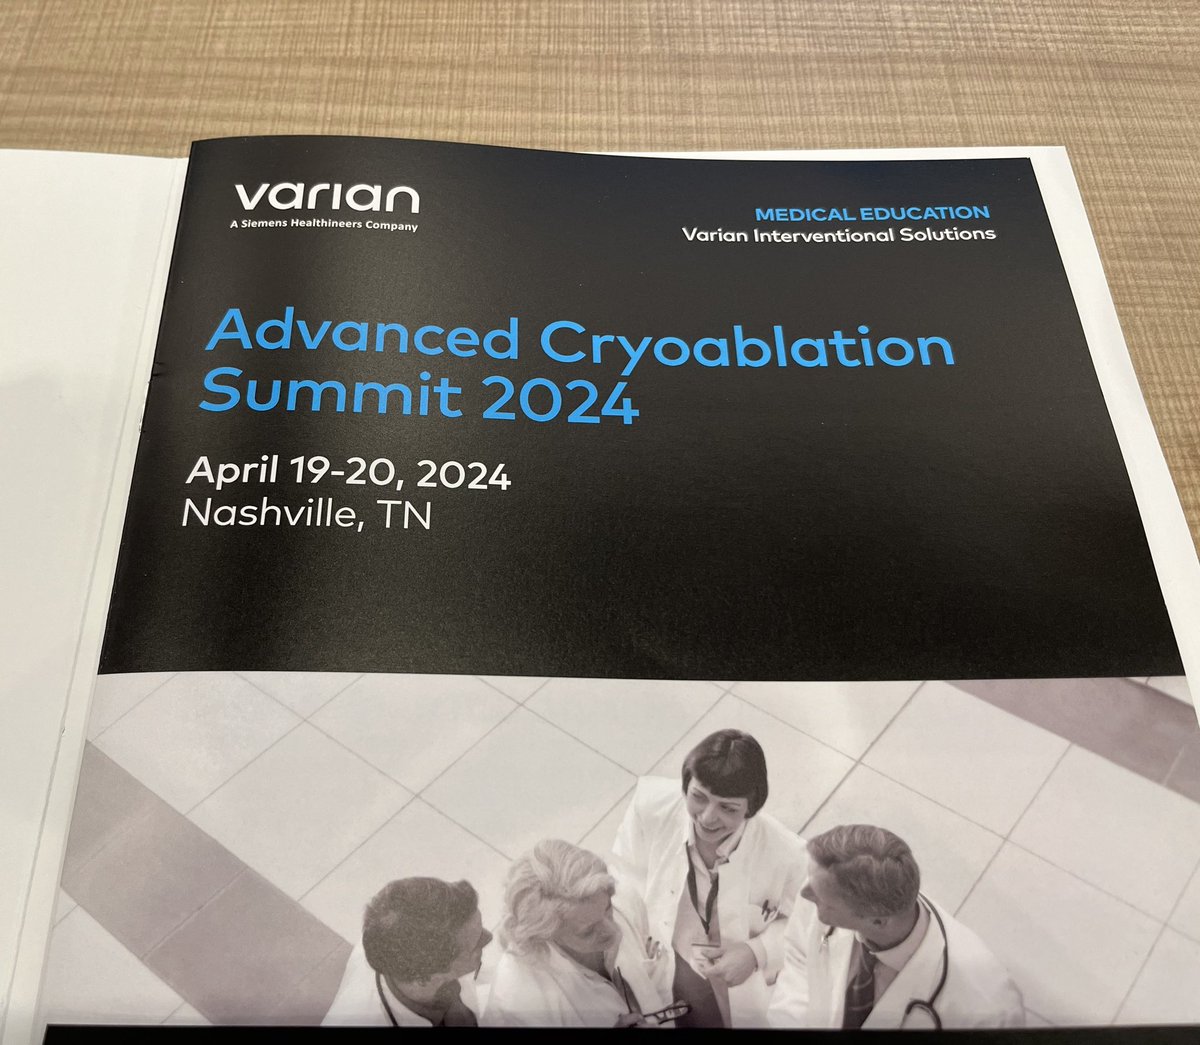 Learning about the amazing applications and practice building with cryoablation techniques @VarianMedSys #interventionaloncology